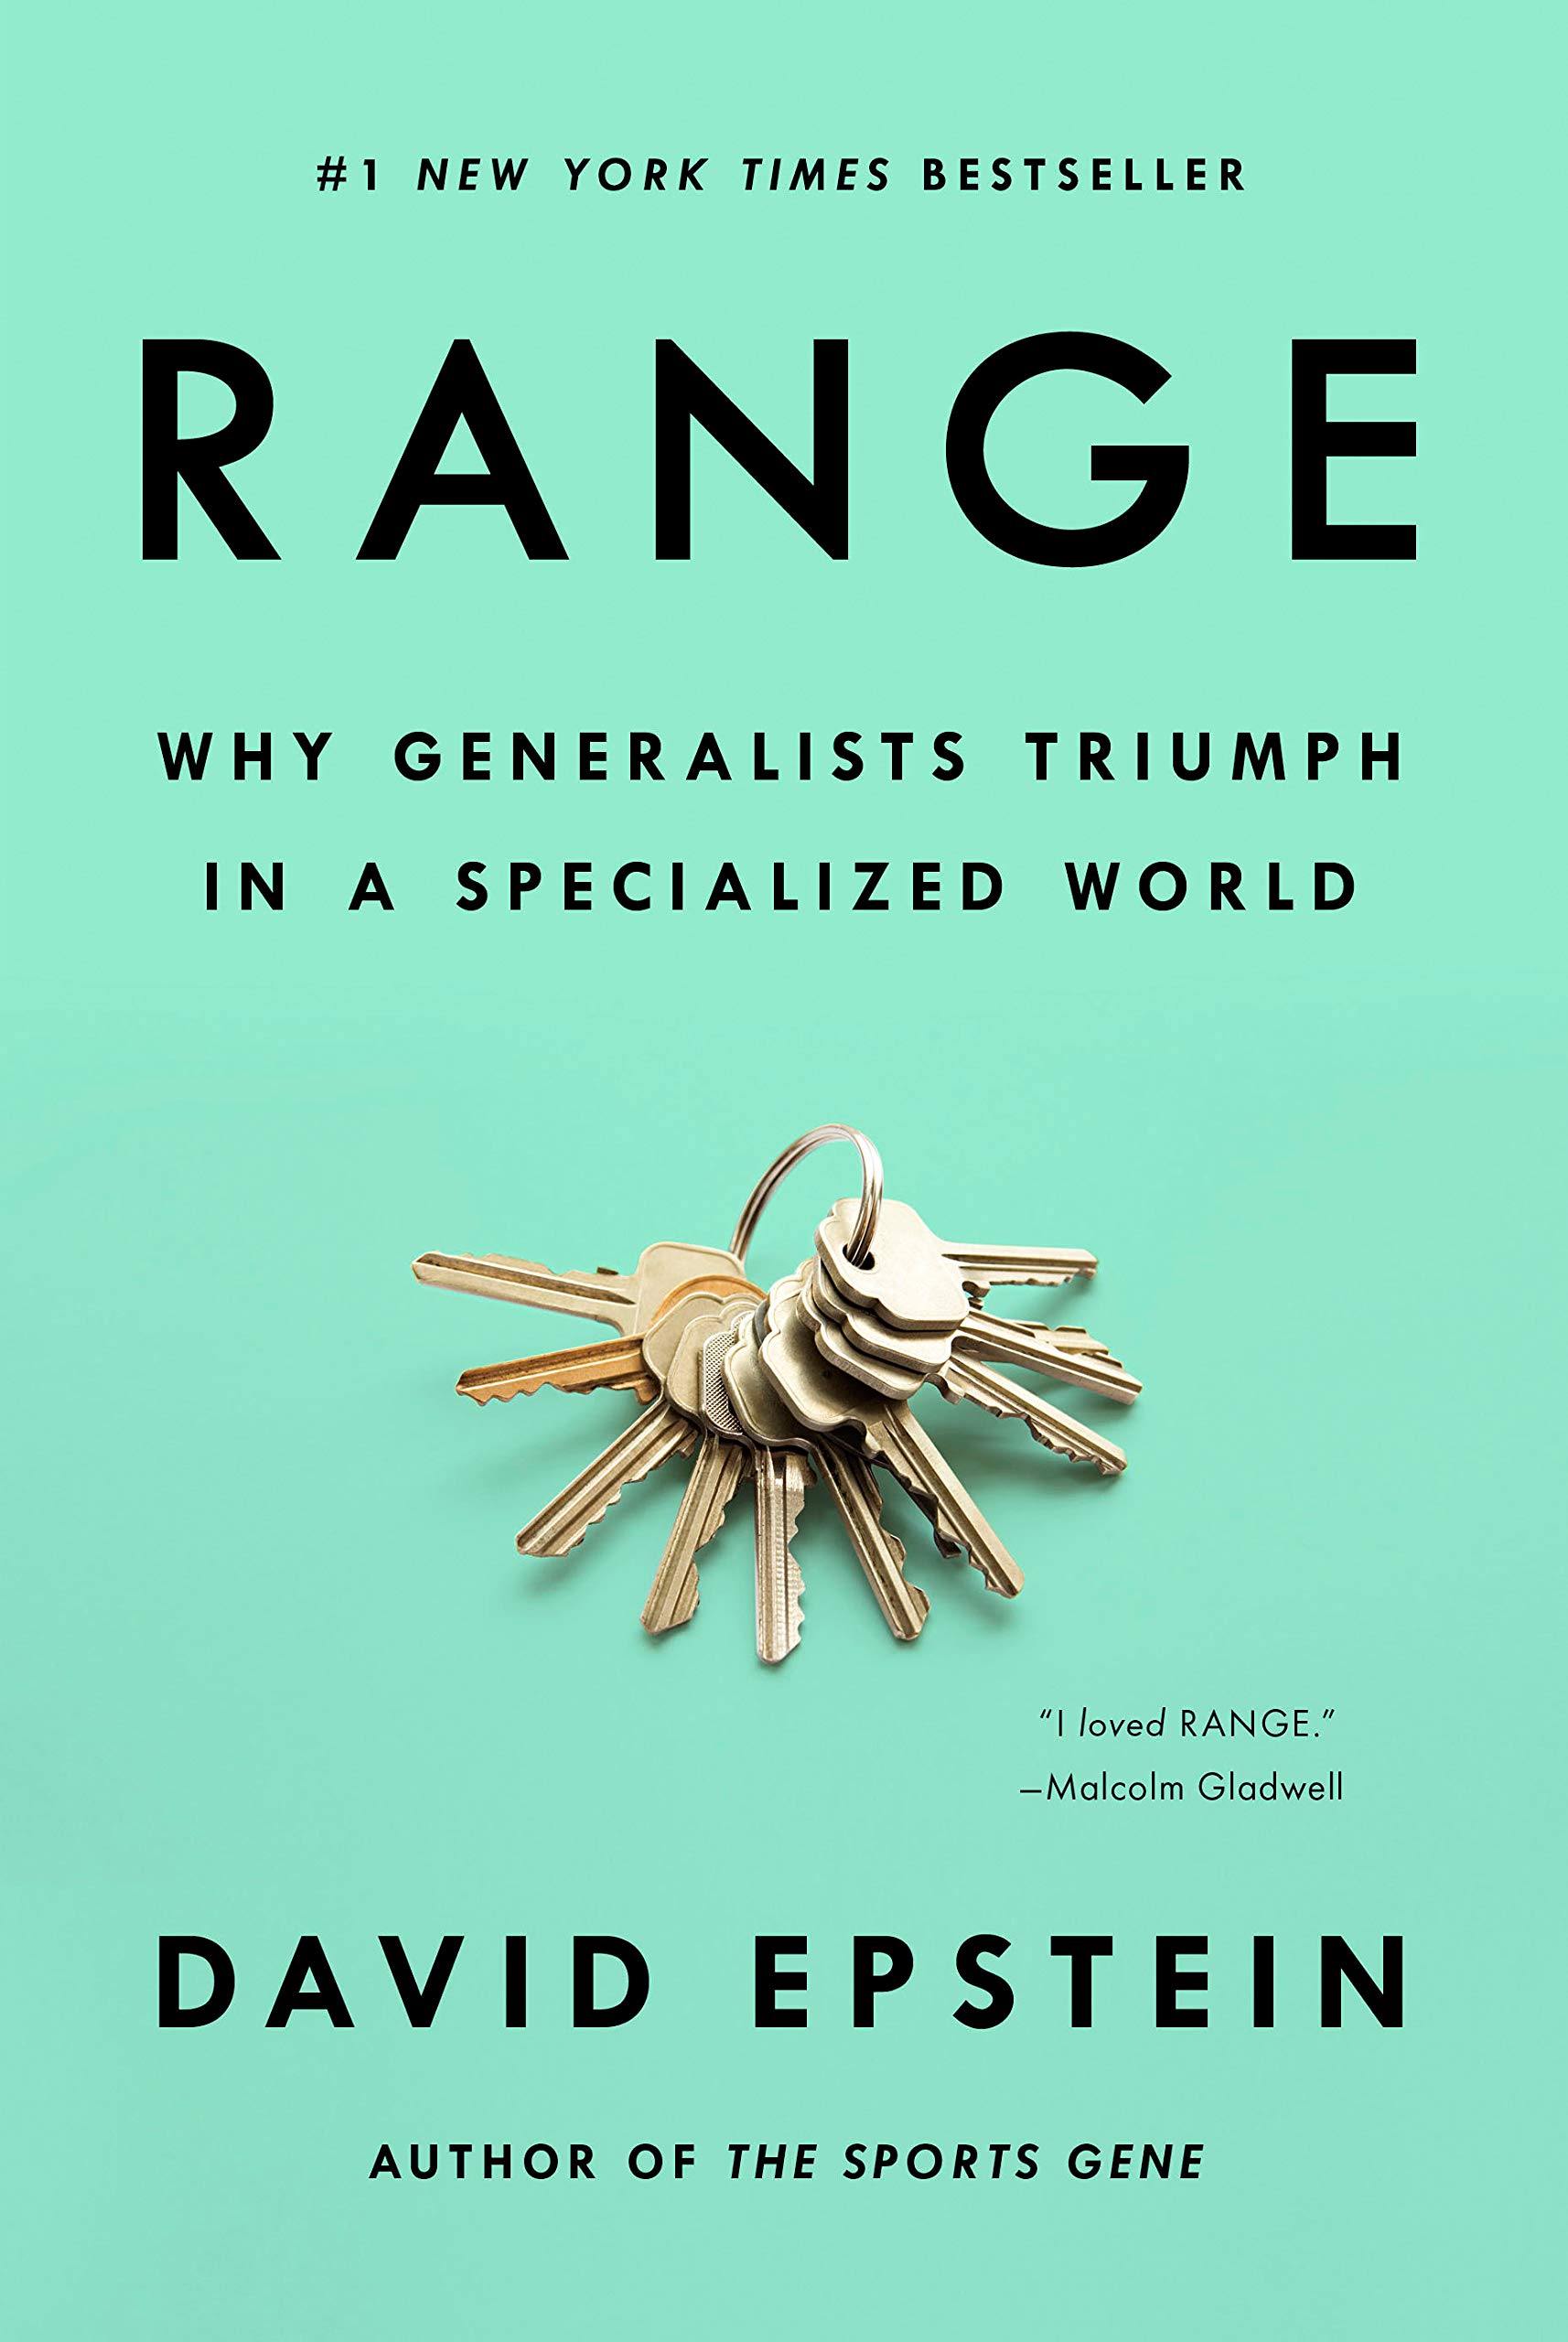  Range: Why Generalists Triumph in a Specialized World